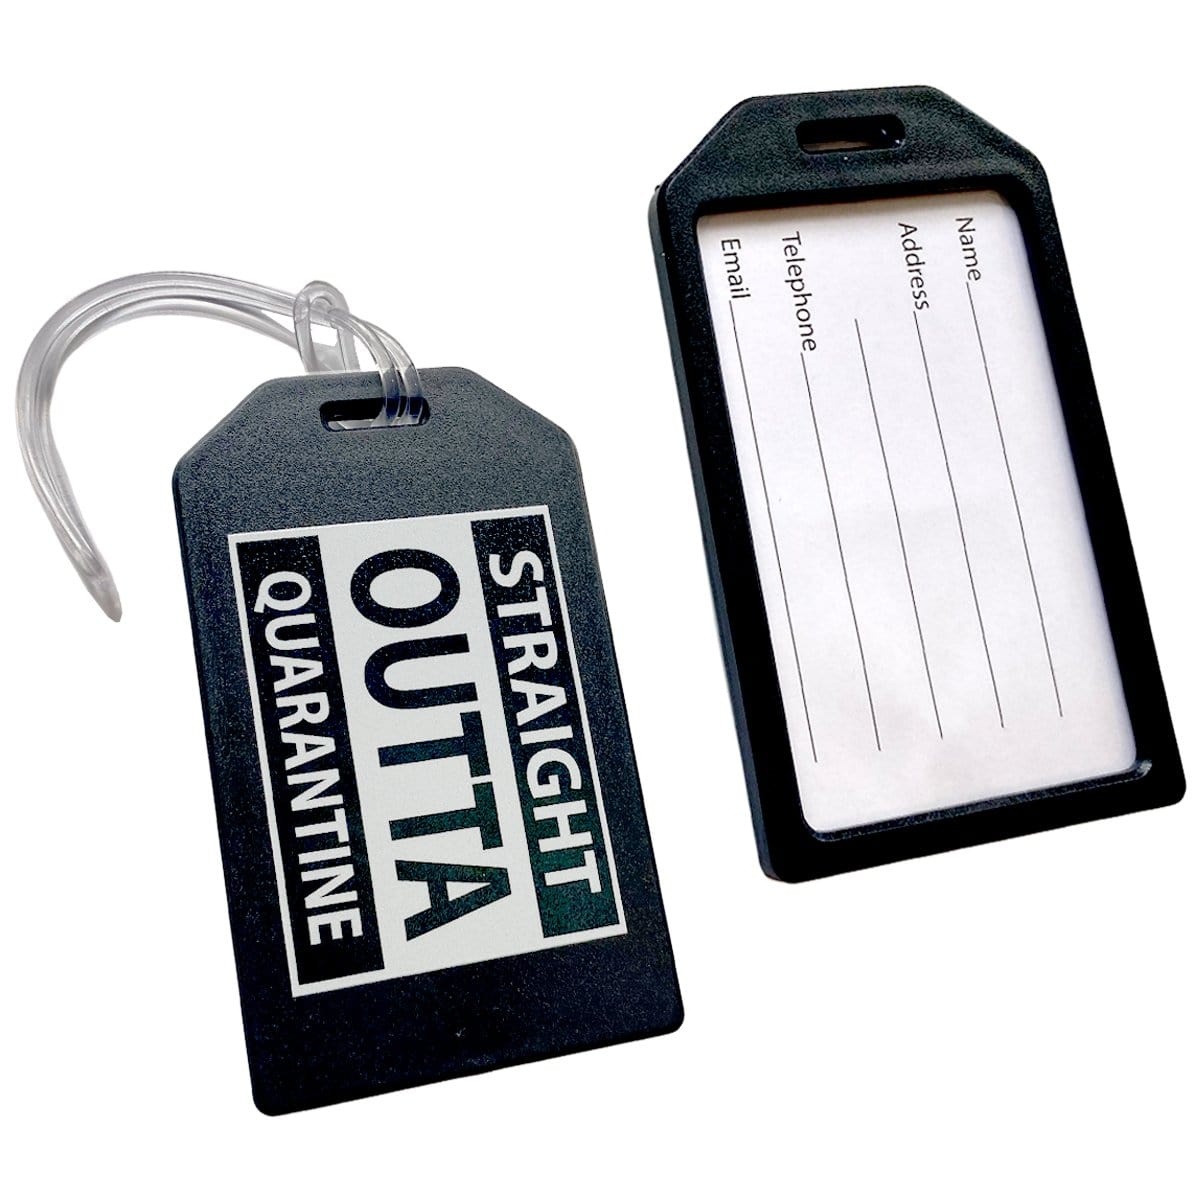 Key Tags and Identifiers in Bulk